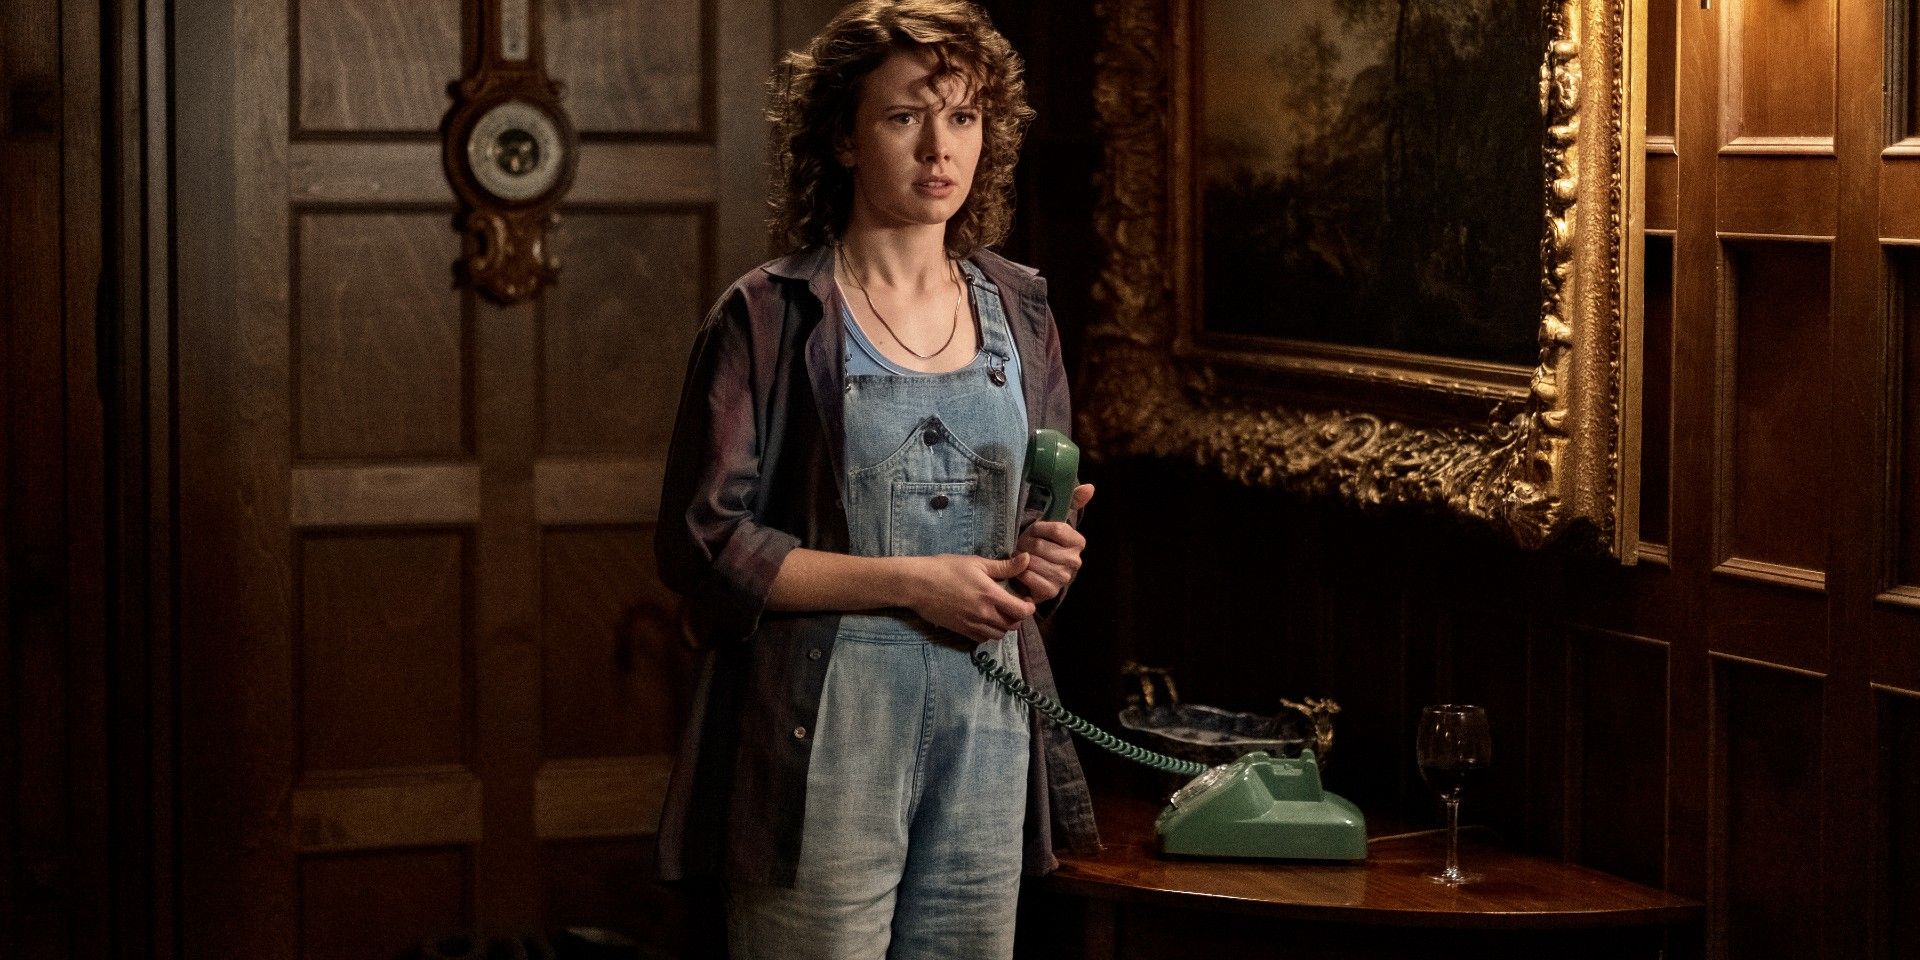 Jamie (Amelia Eve) stands in the halls of Bly Manor, holding the phone and wearing overalls, in The Haunting of Bly Manor